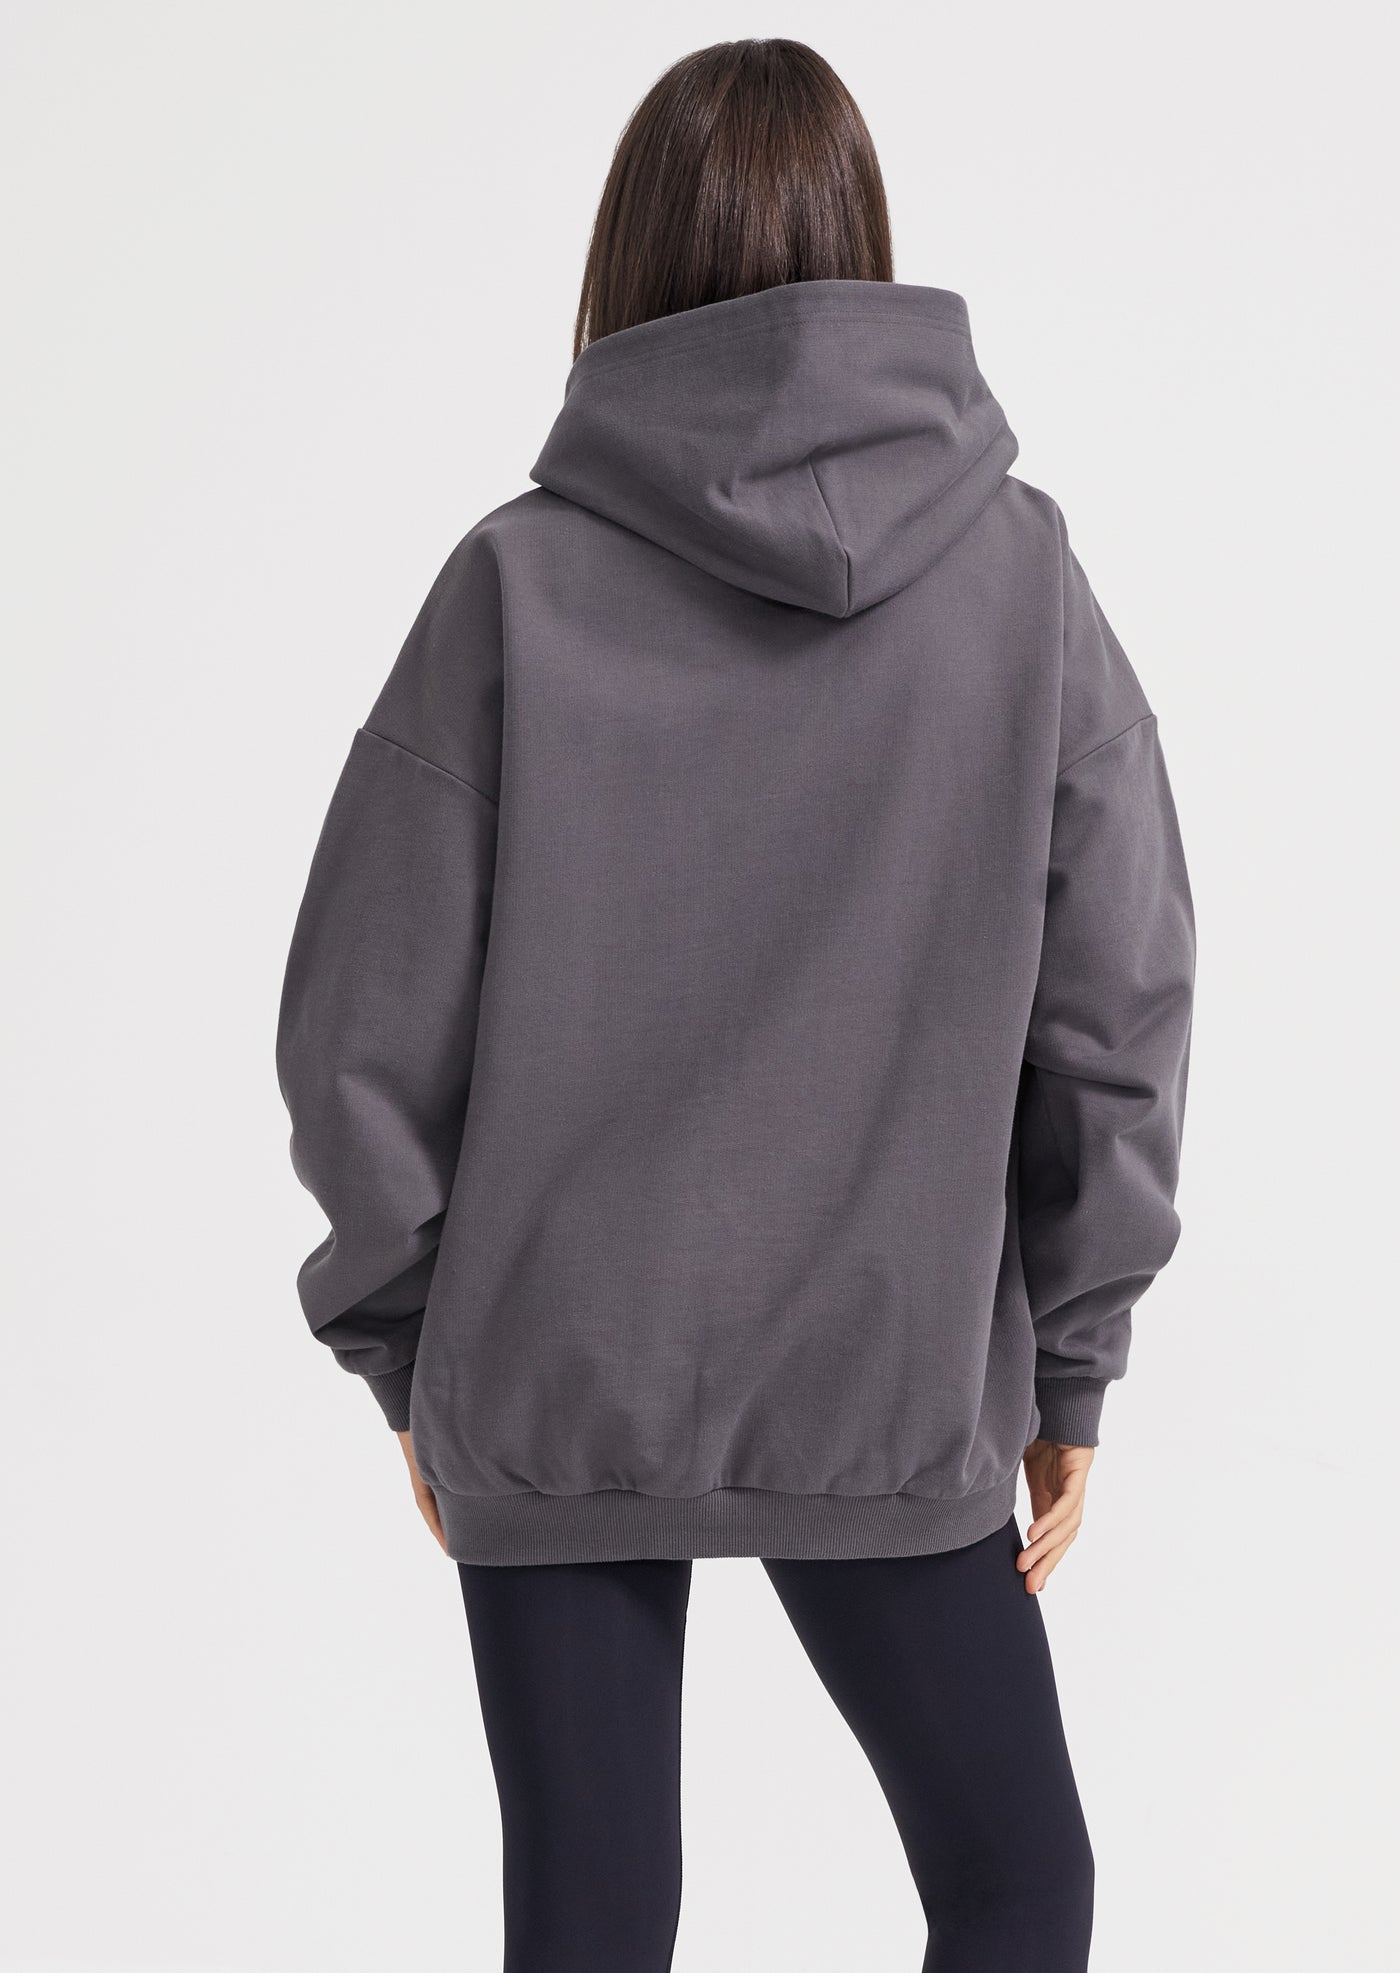 ALLIANCE HOODIE IN CHARCOAL